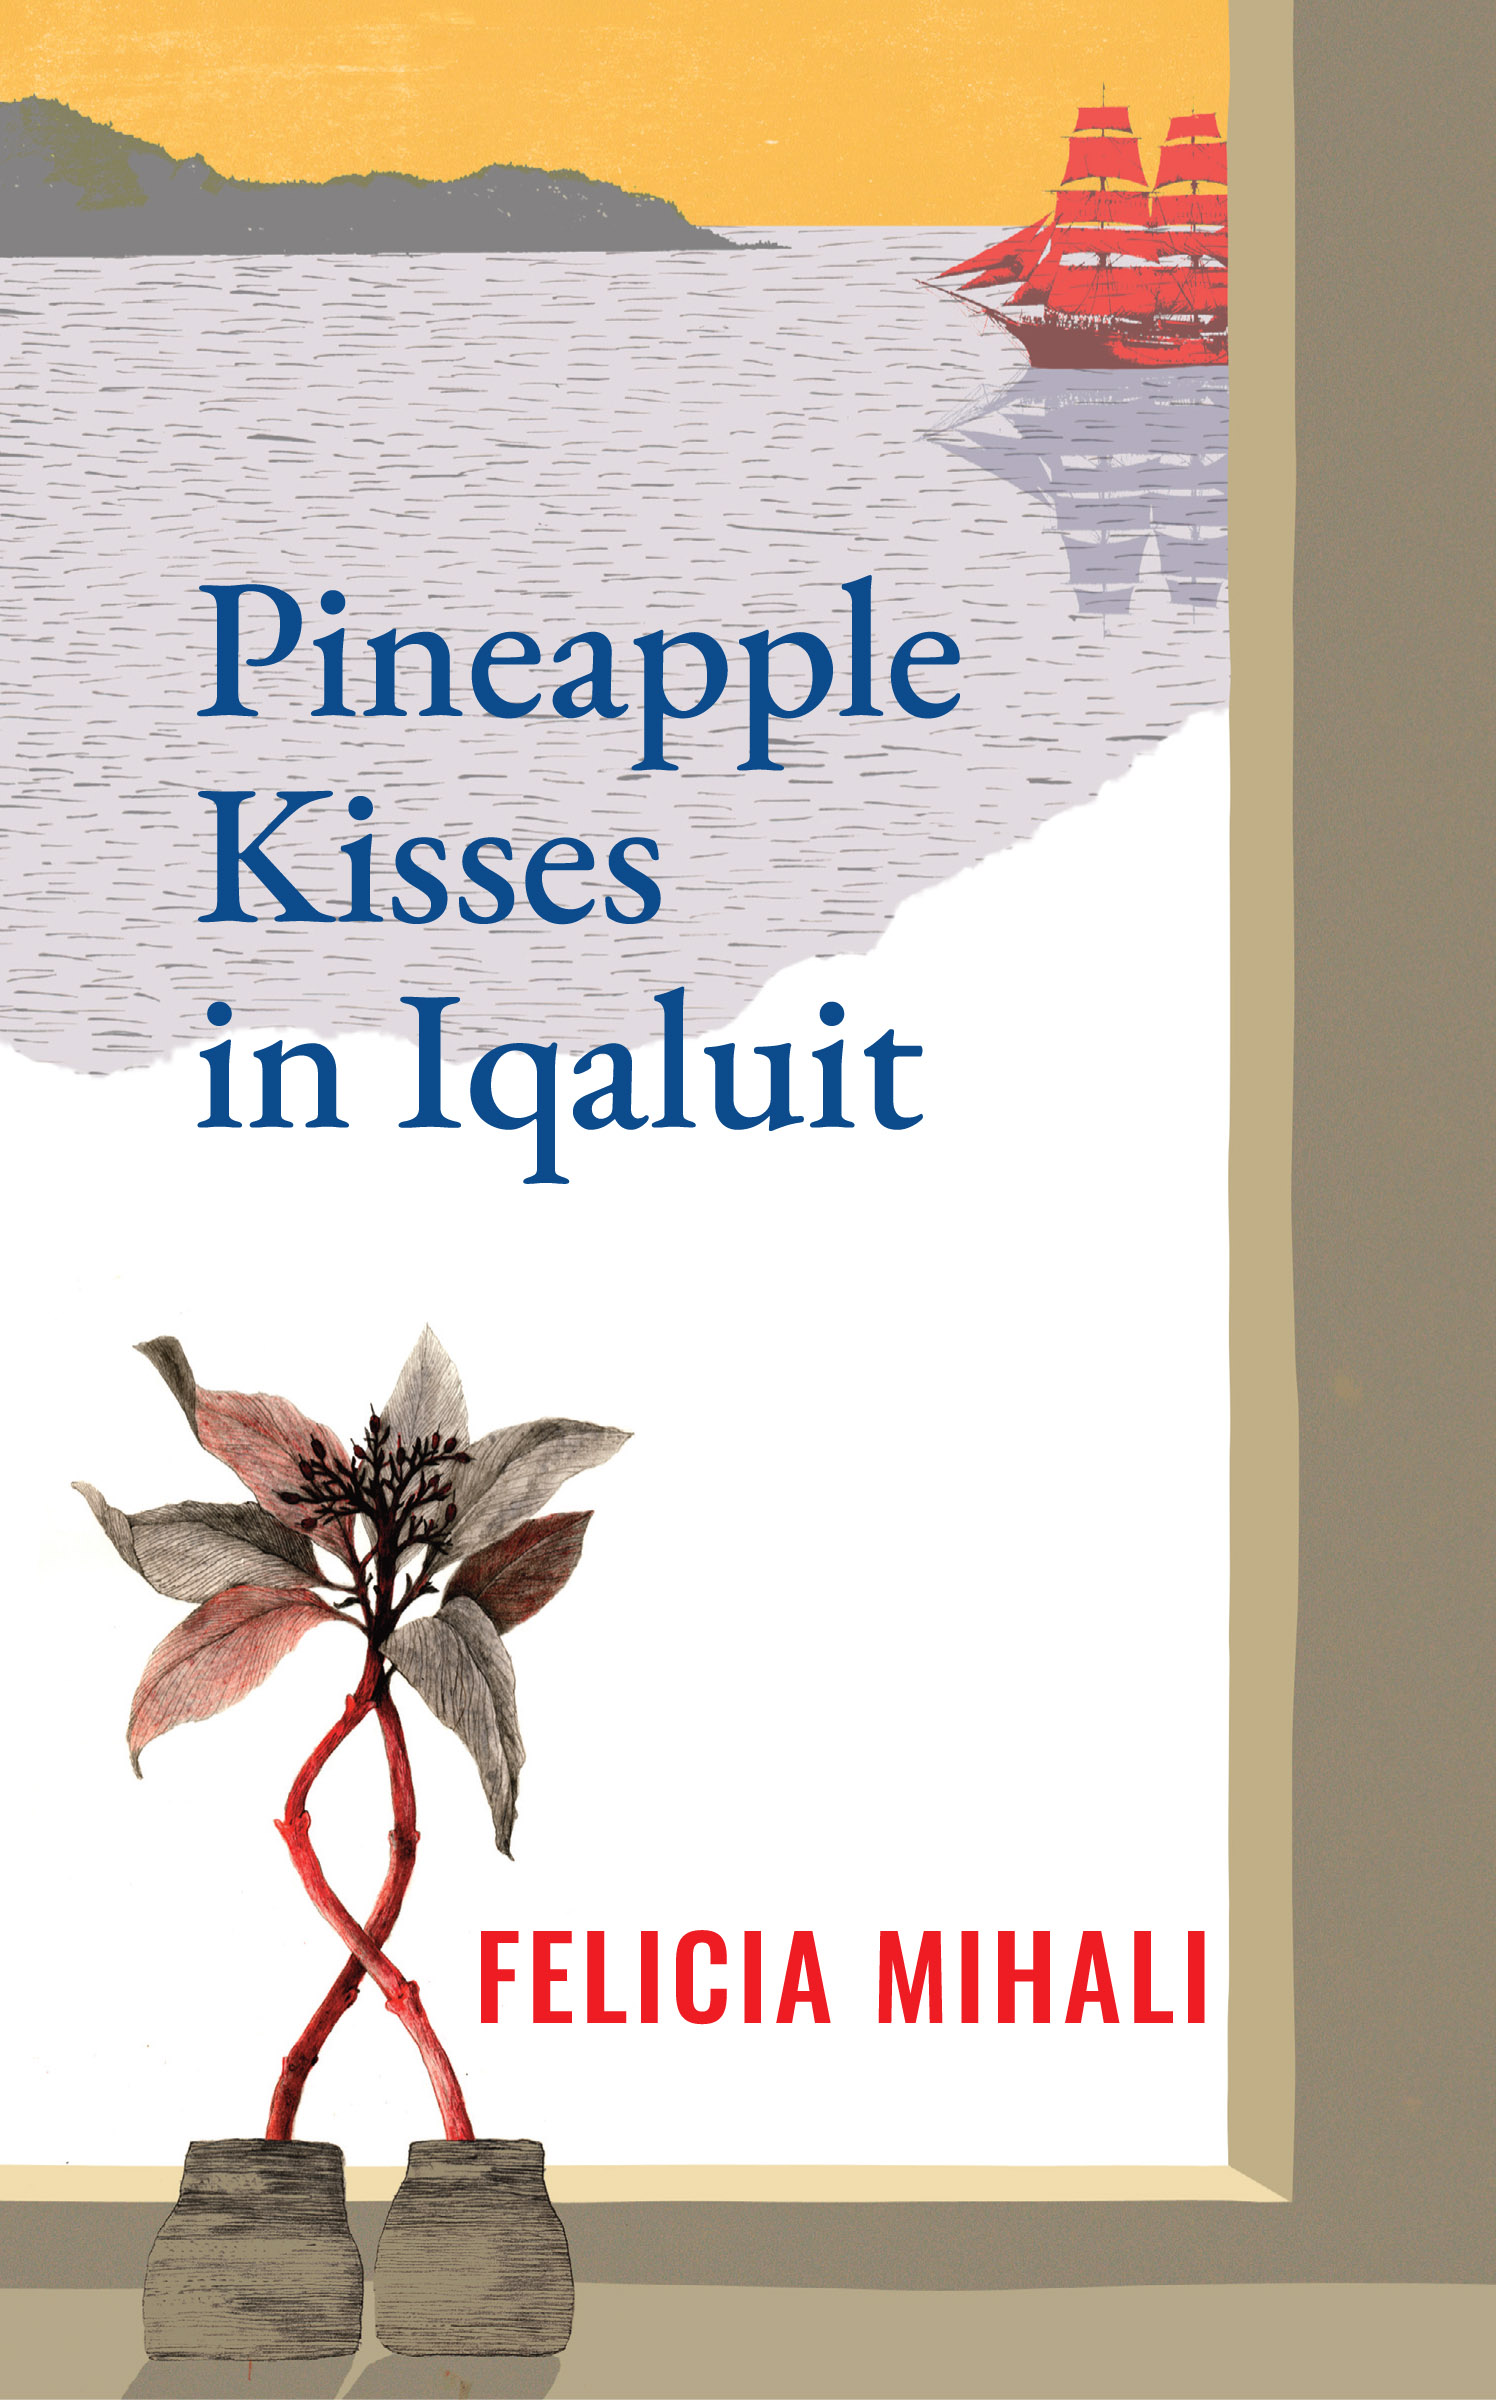 Pineapple Kisses in Iqualuit